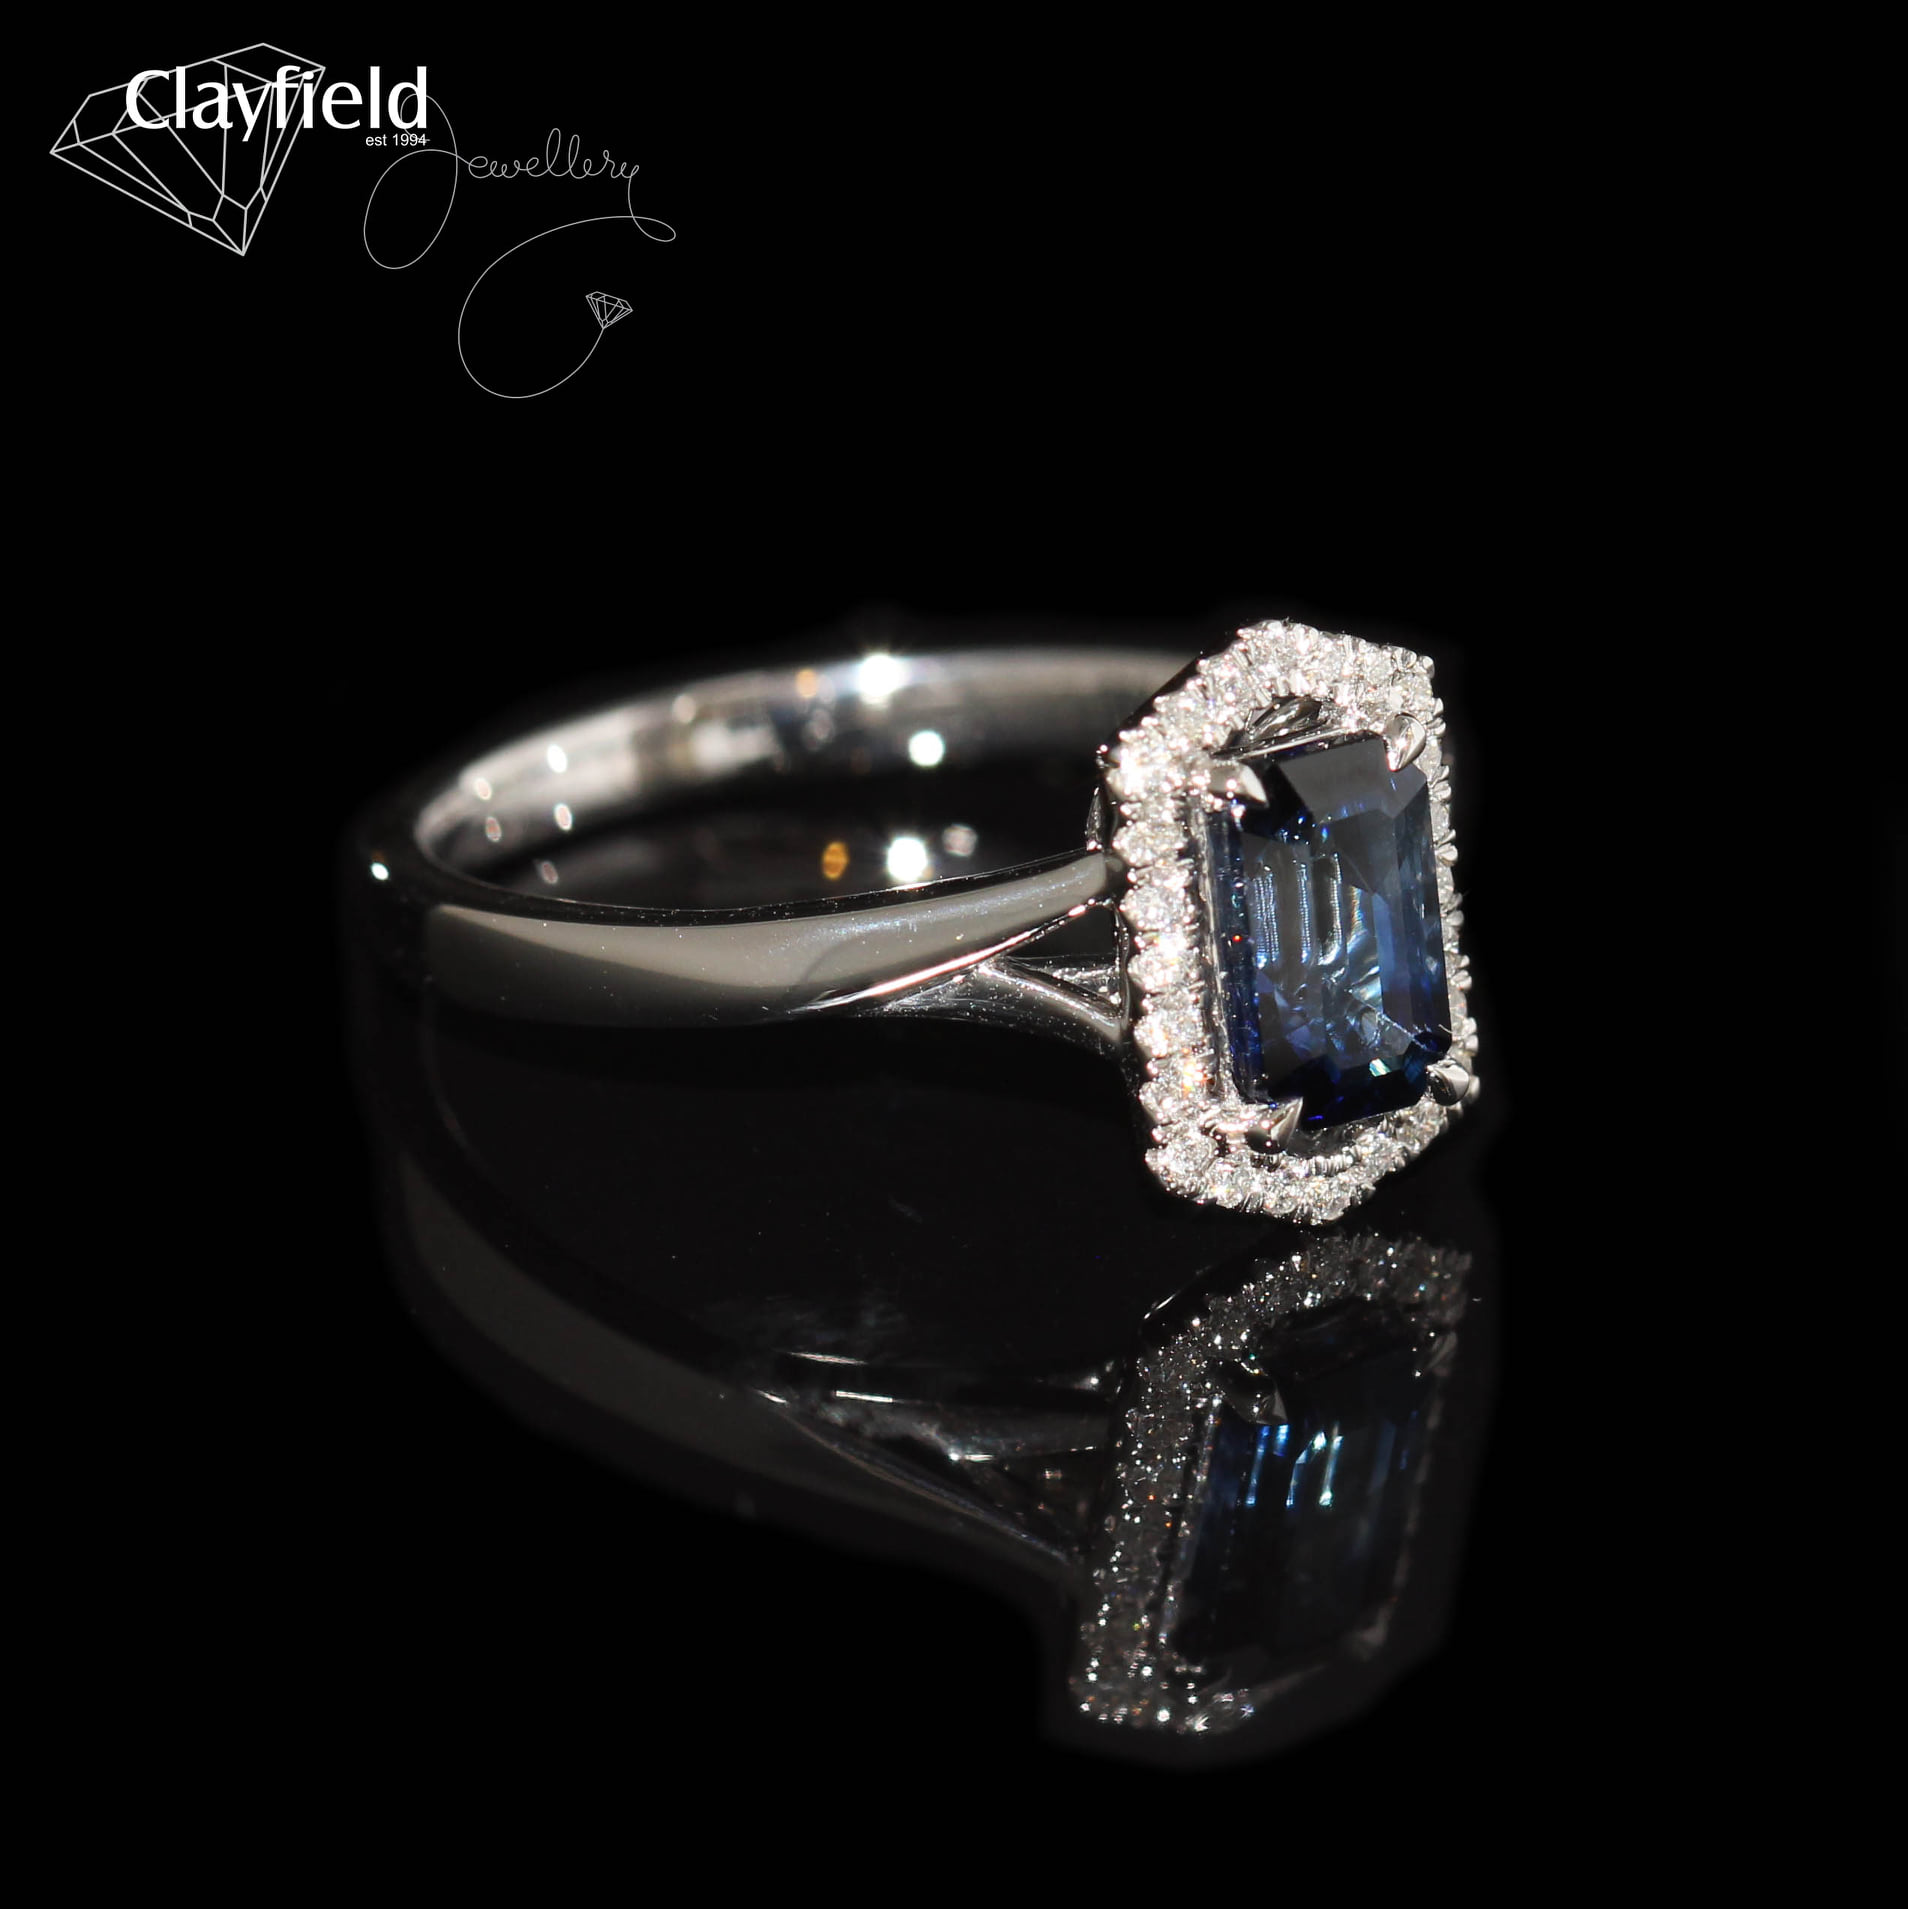 18ct White Gold ring contains a 1.23ct Sapphire & 24 Diamonds